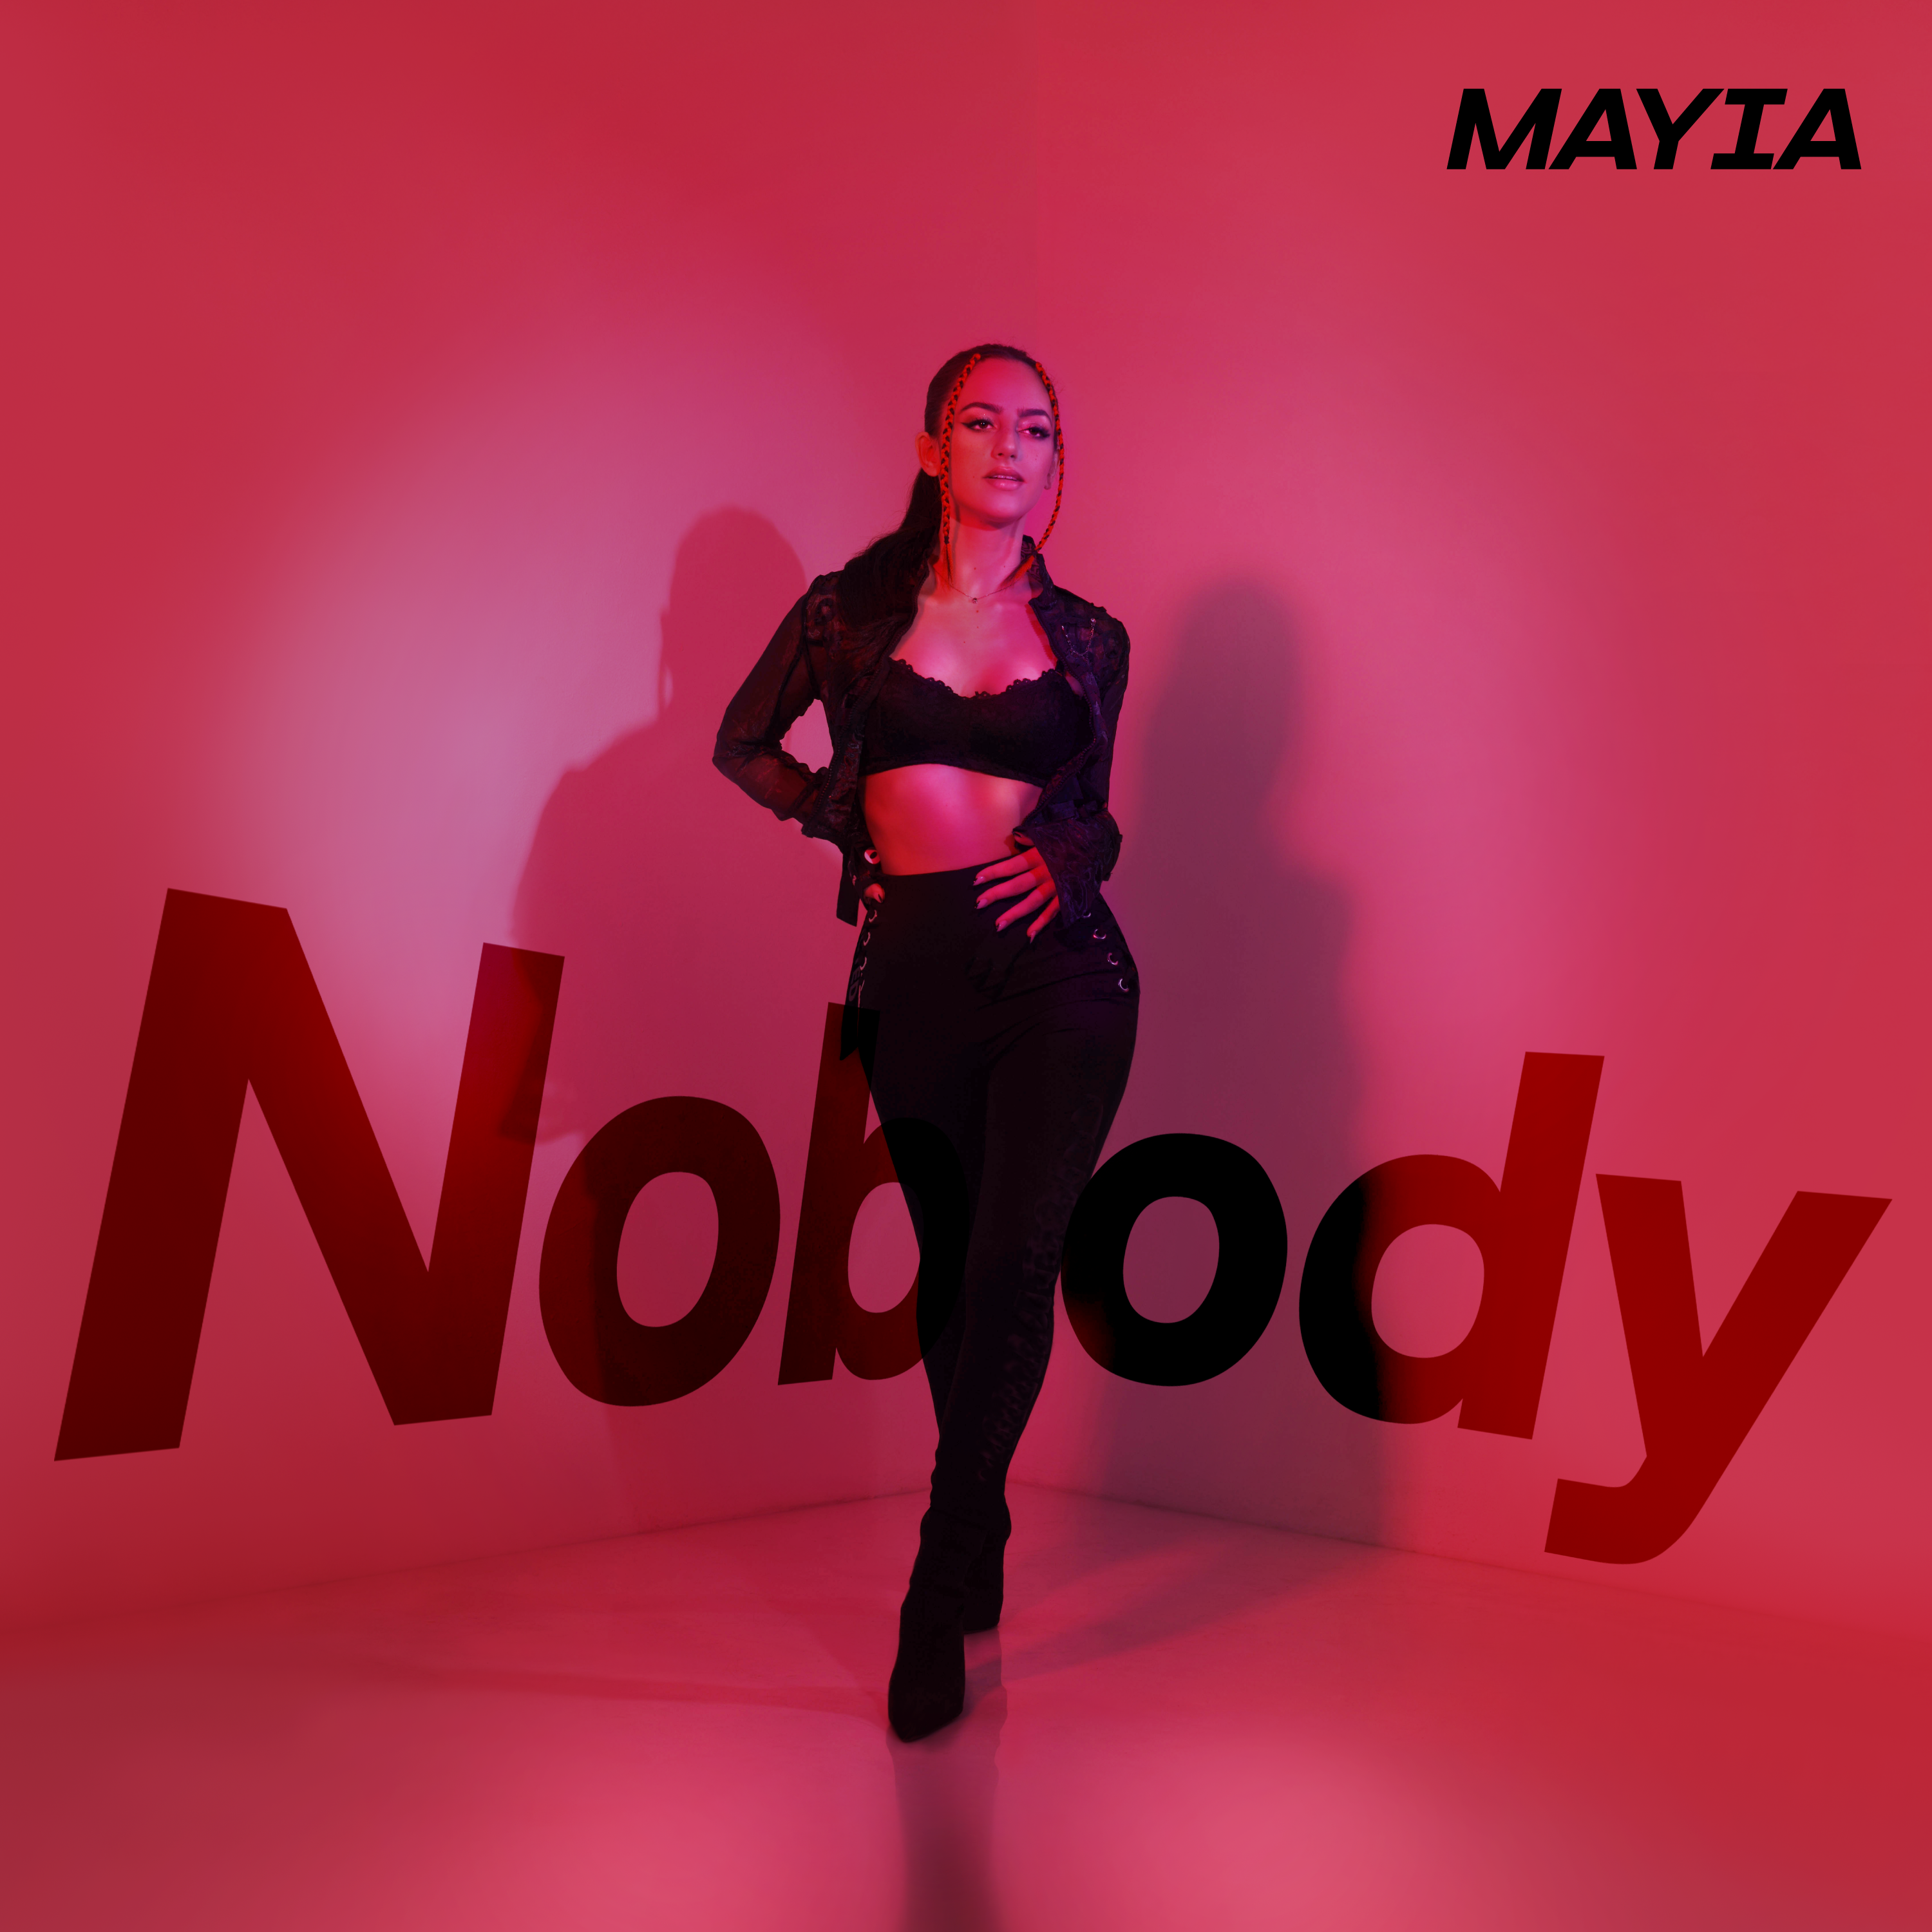 Mayia’s Boundless Talent All Over Her New Single “Nobody”